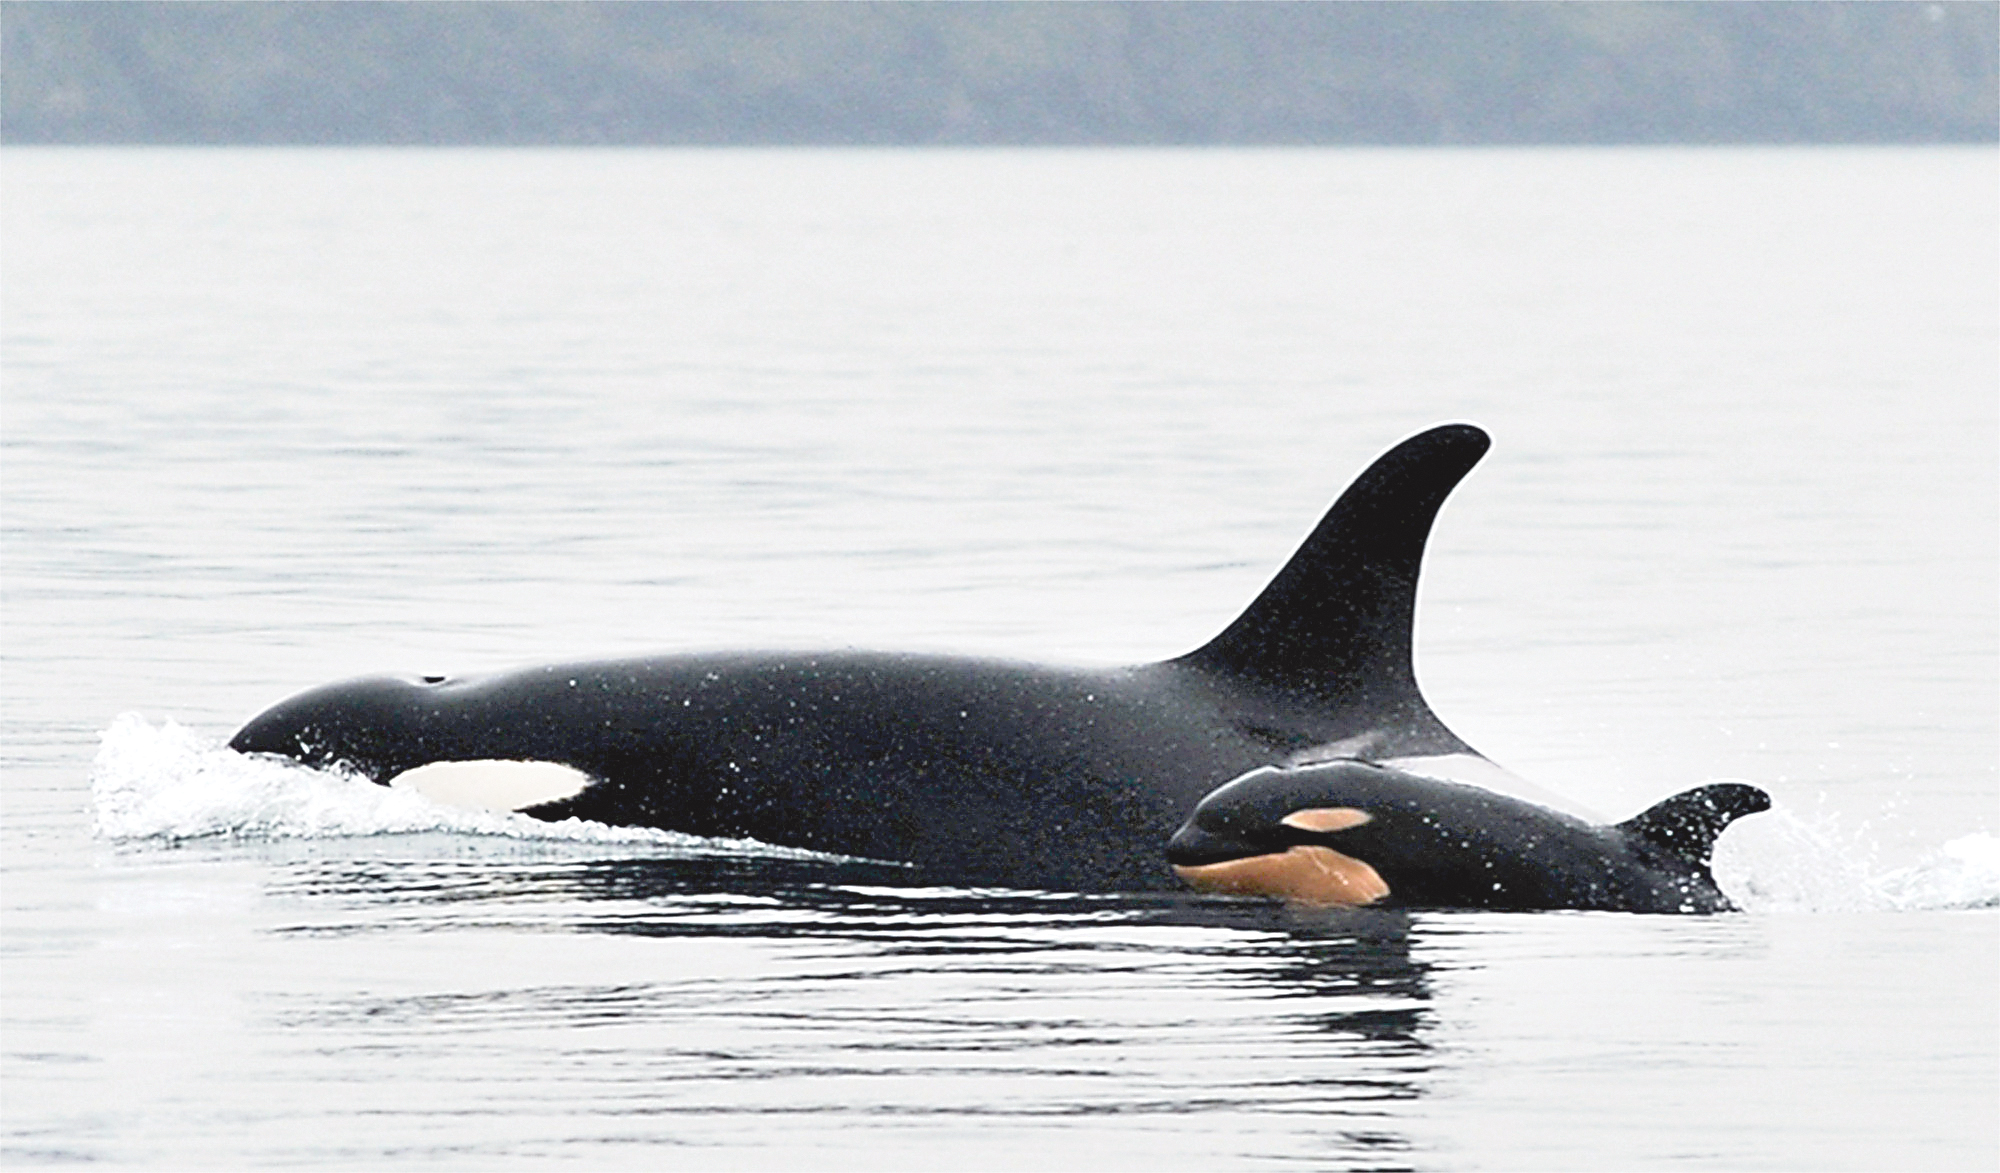 A new baby orca whale calf known as J-51 swims with J-19